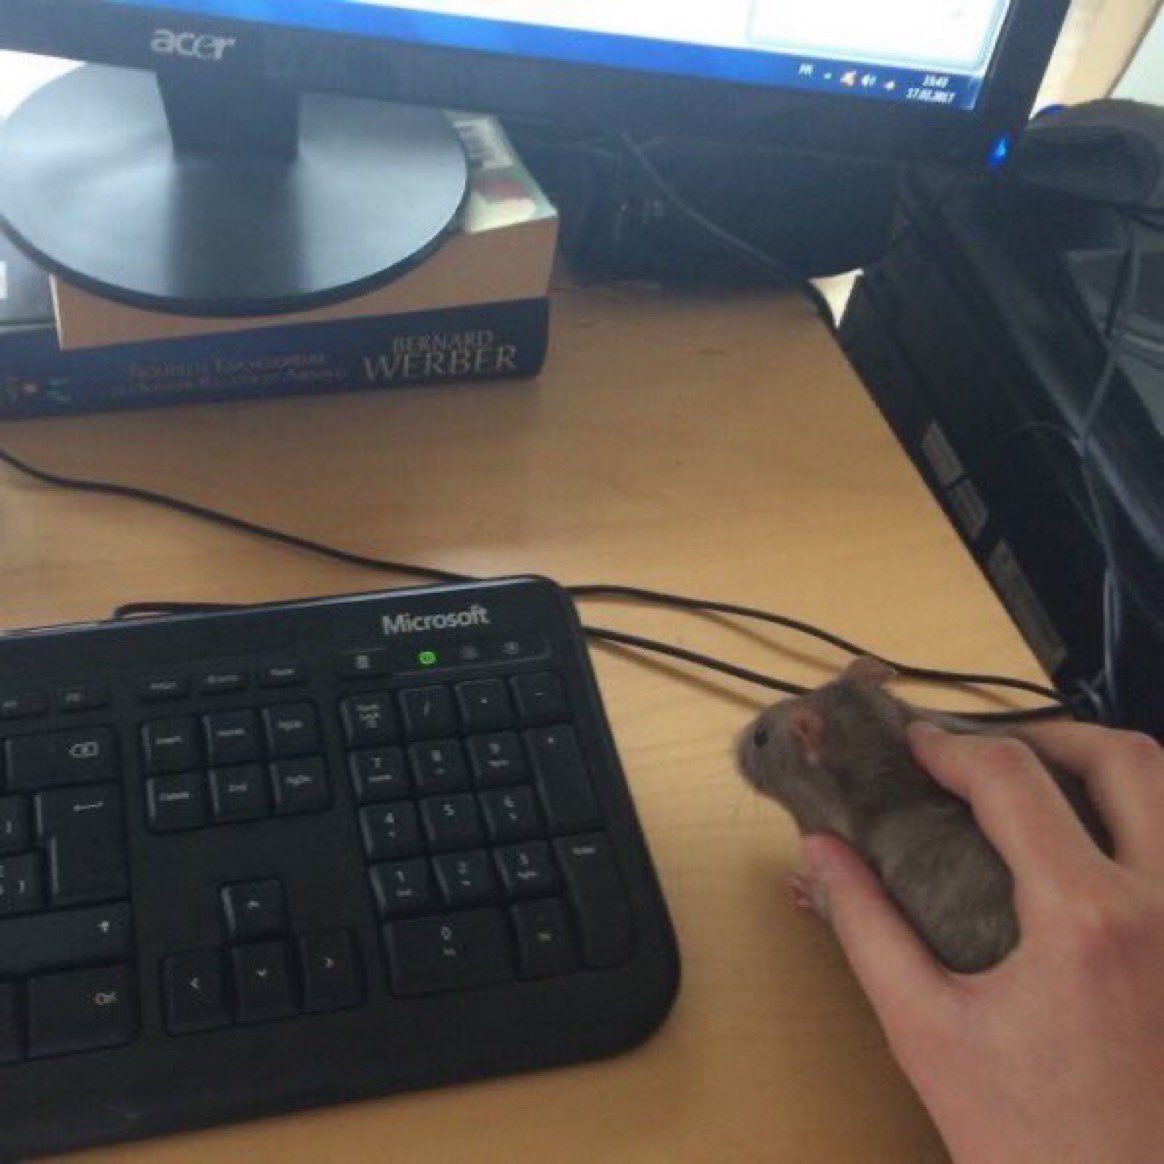 Just found this mouse seems to be in good shape.